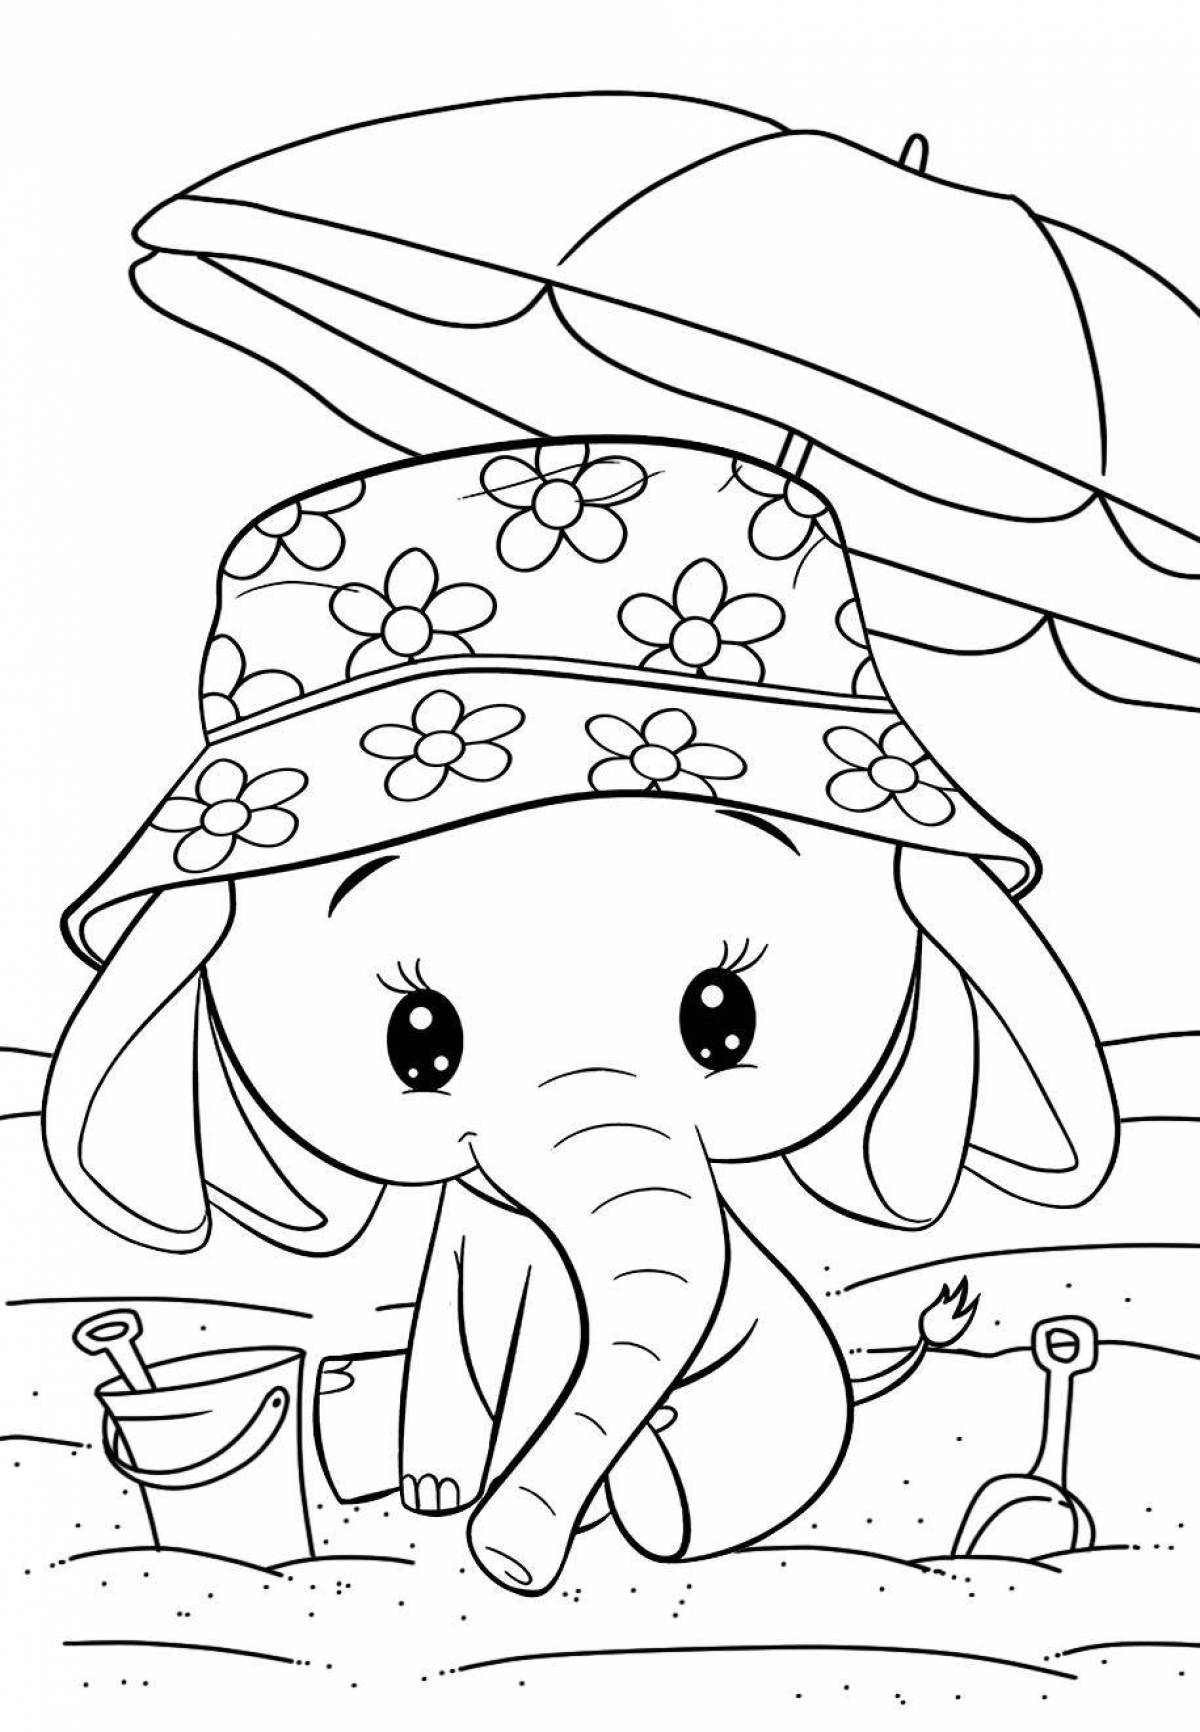 Radiant coloring page elephant and girl